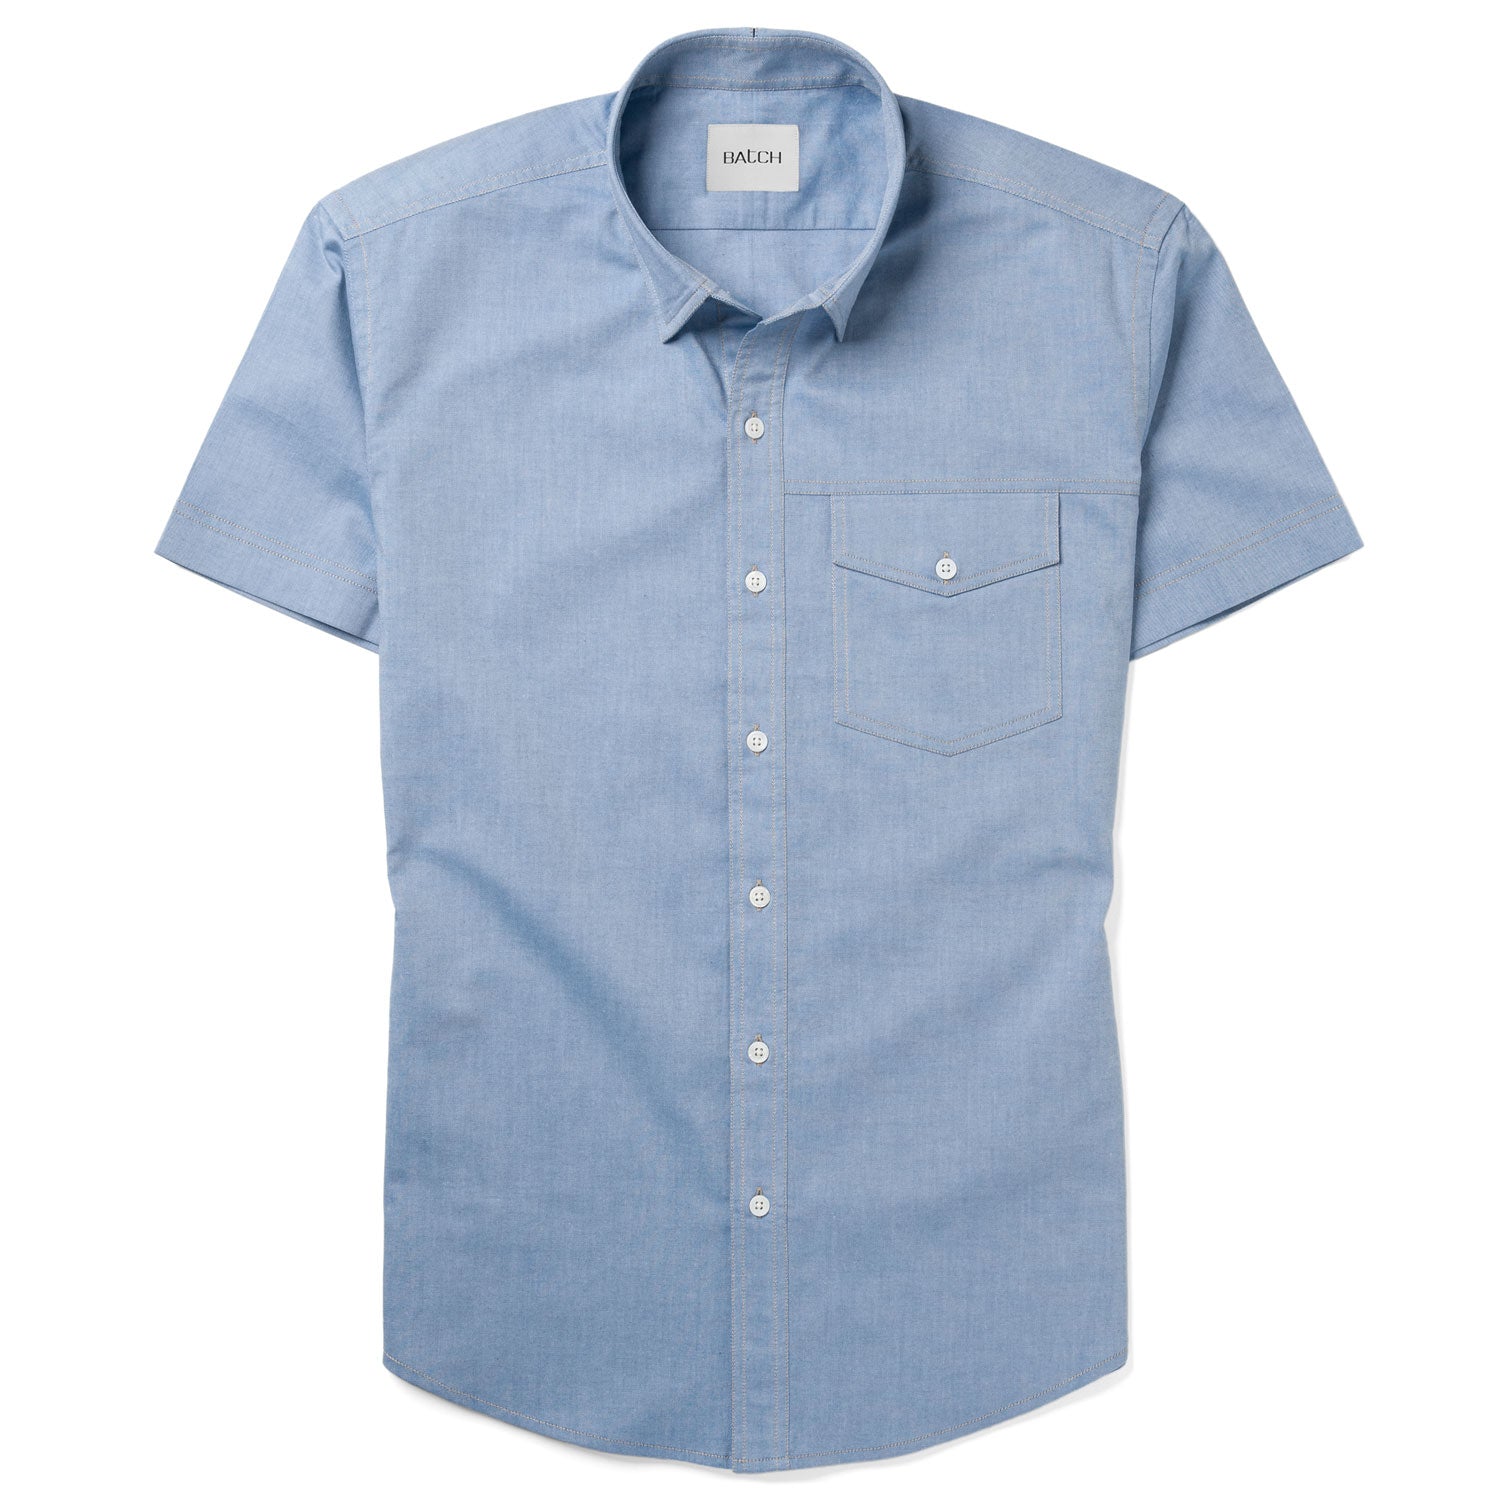 Author Short Sleeve Casual Shirt – Classic Blue Cotton Oxford